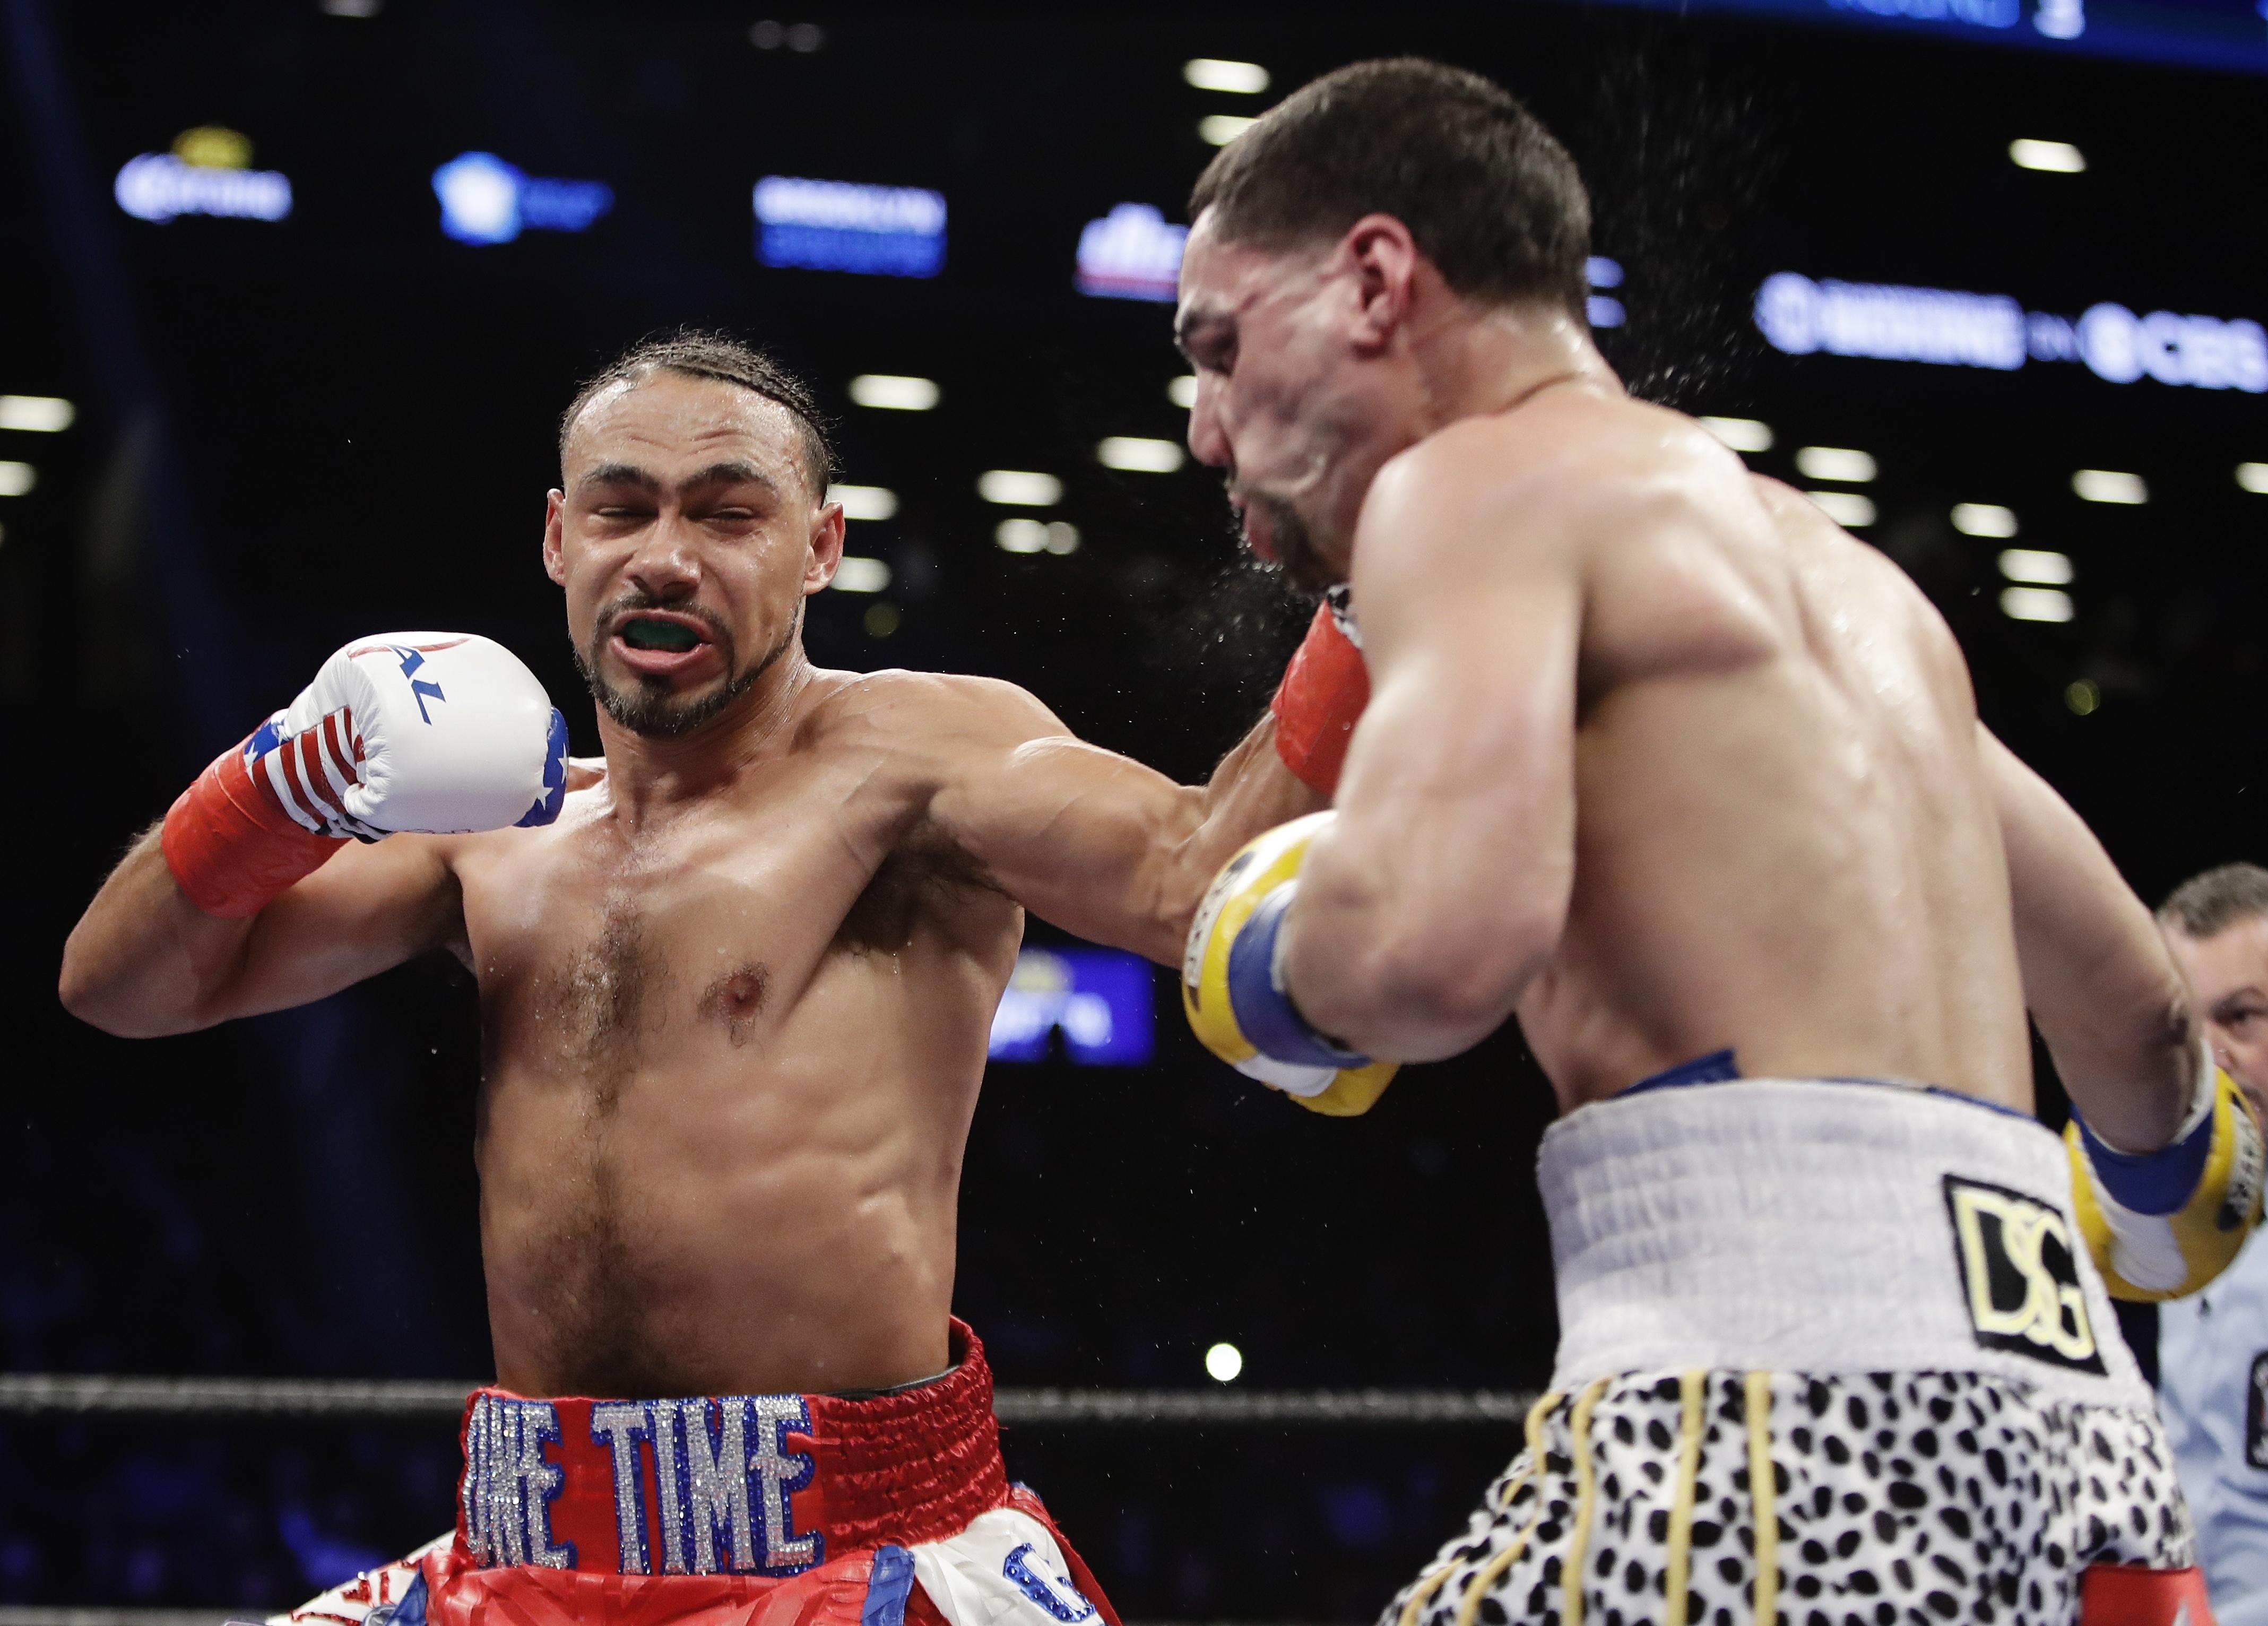 Thurman defeats Garcia by split decision to unify welterweight titles - CBS News